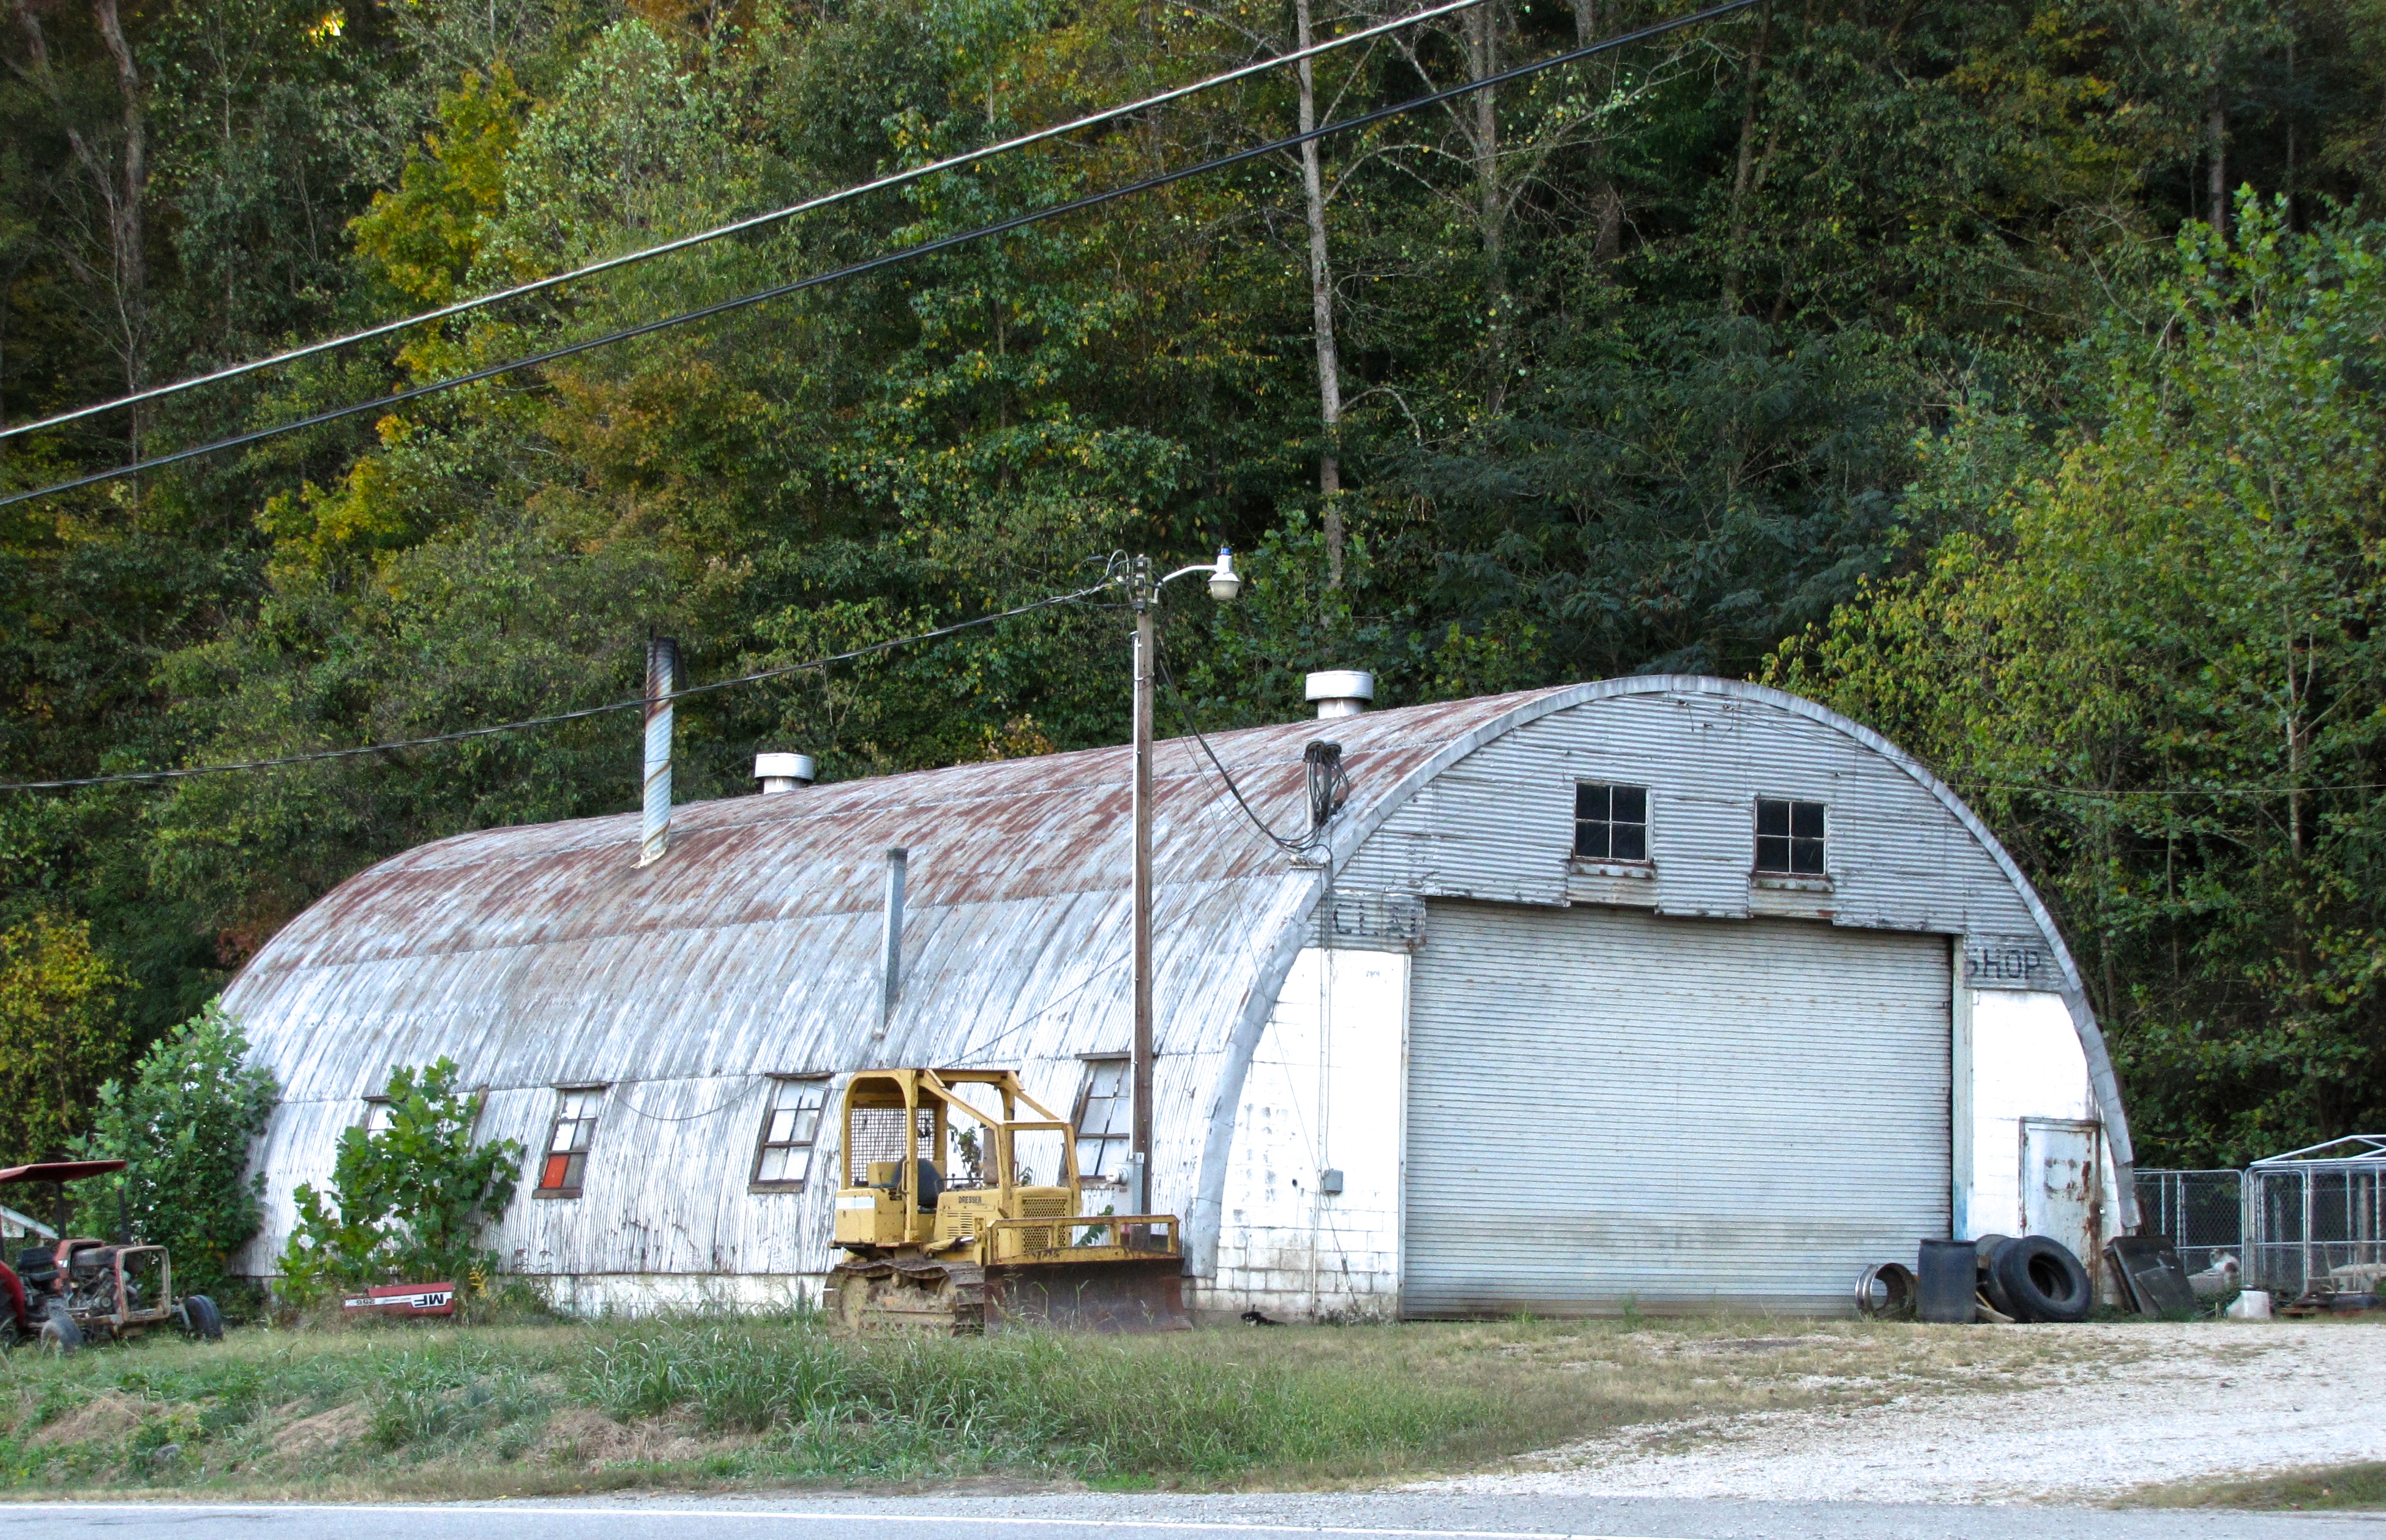 quonset hut in Terms Of Service, MI